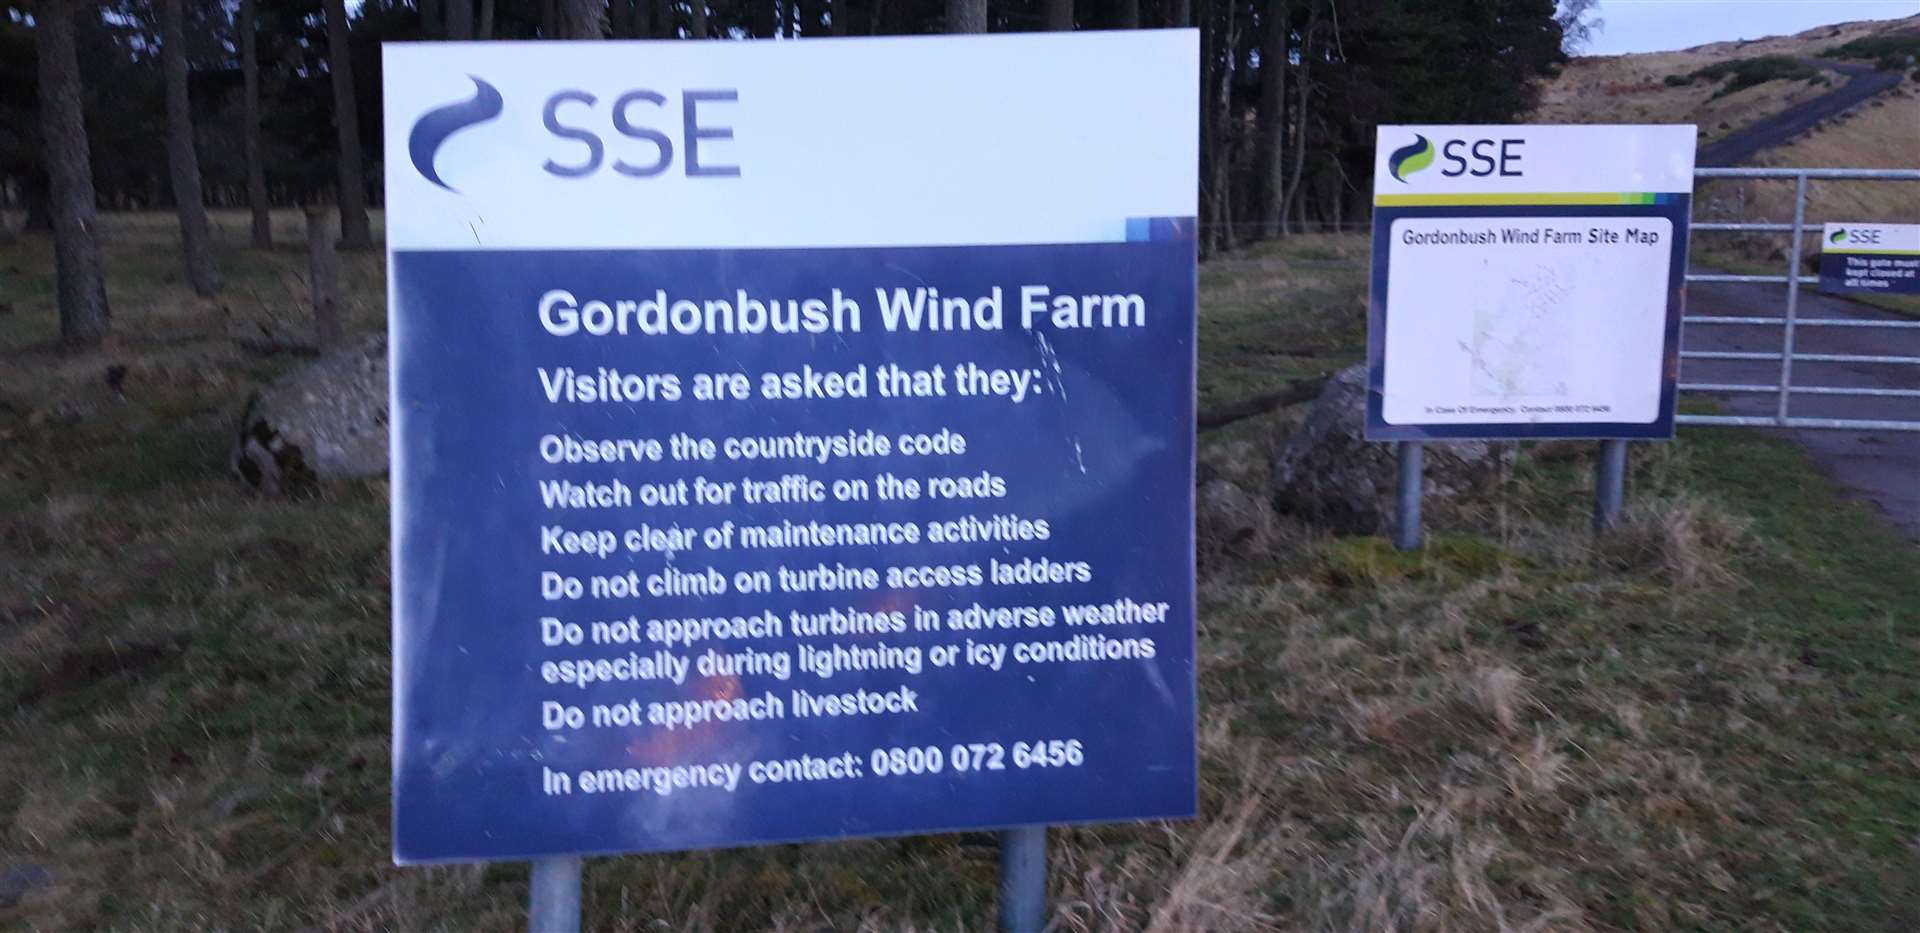 The existing Gordonbush wind farm has consequently been paid over £16.4 million to reduce output since it was commissioned in 2012.